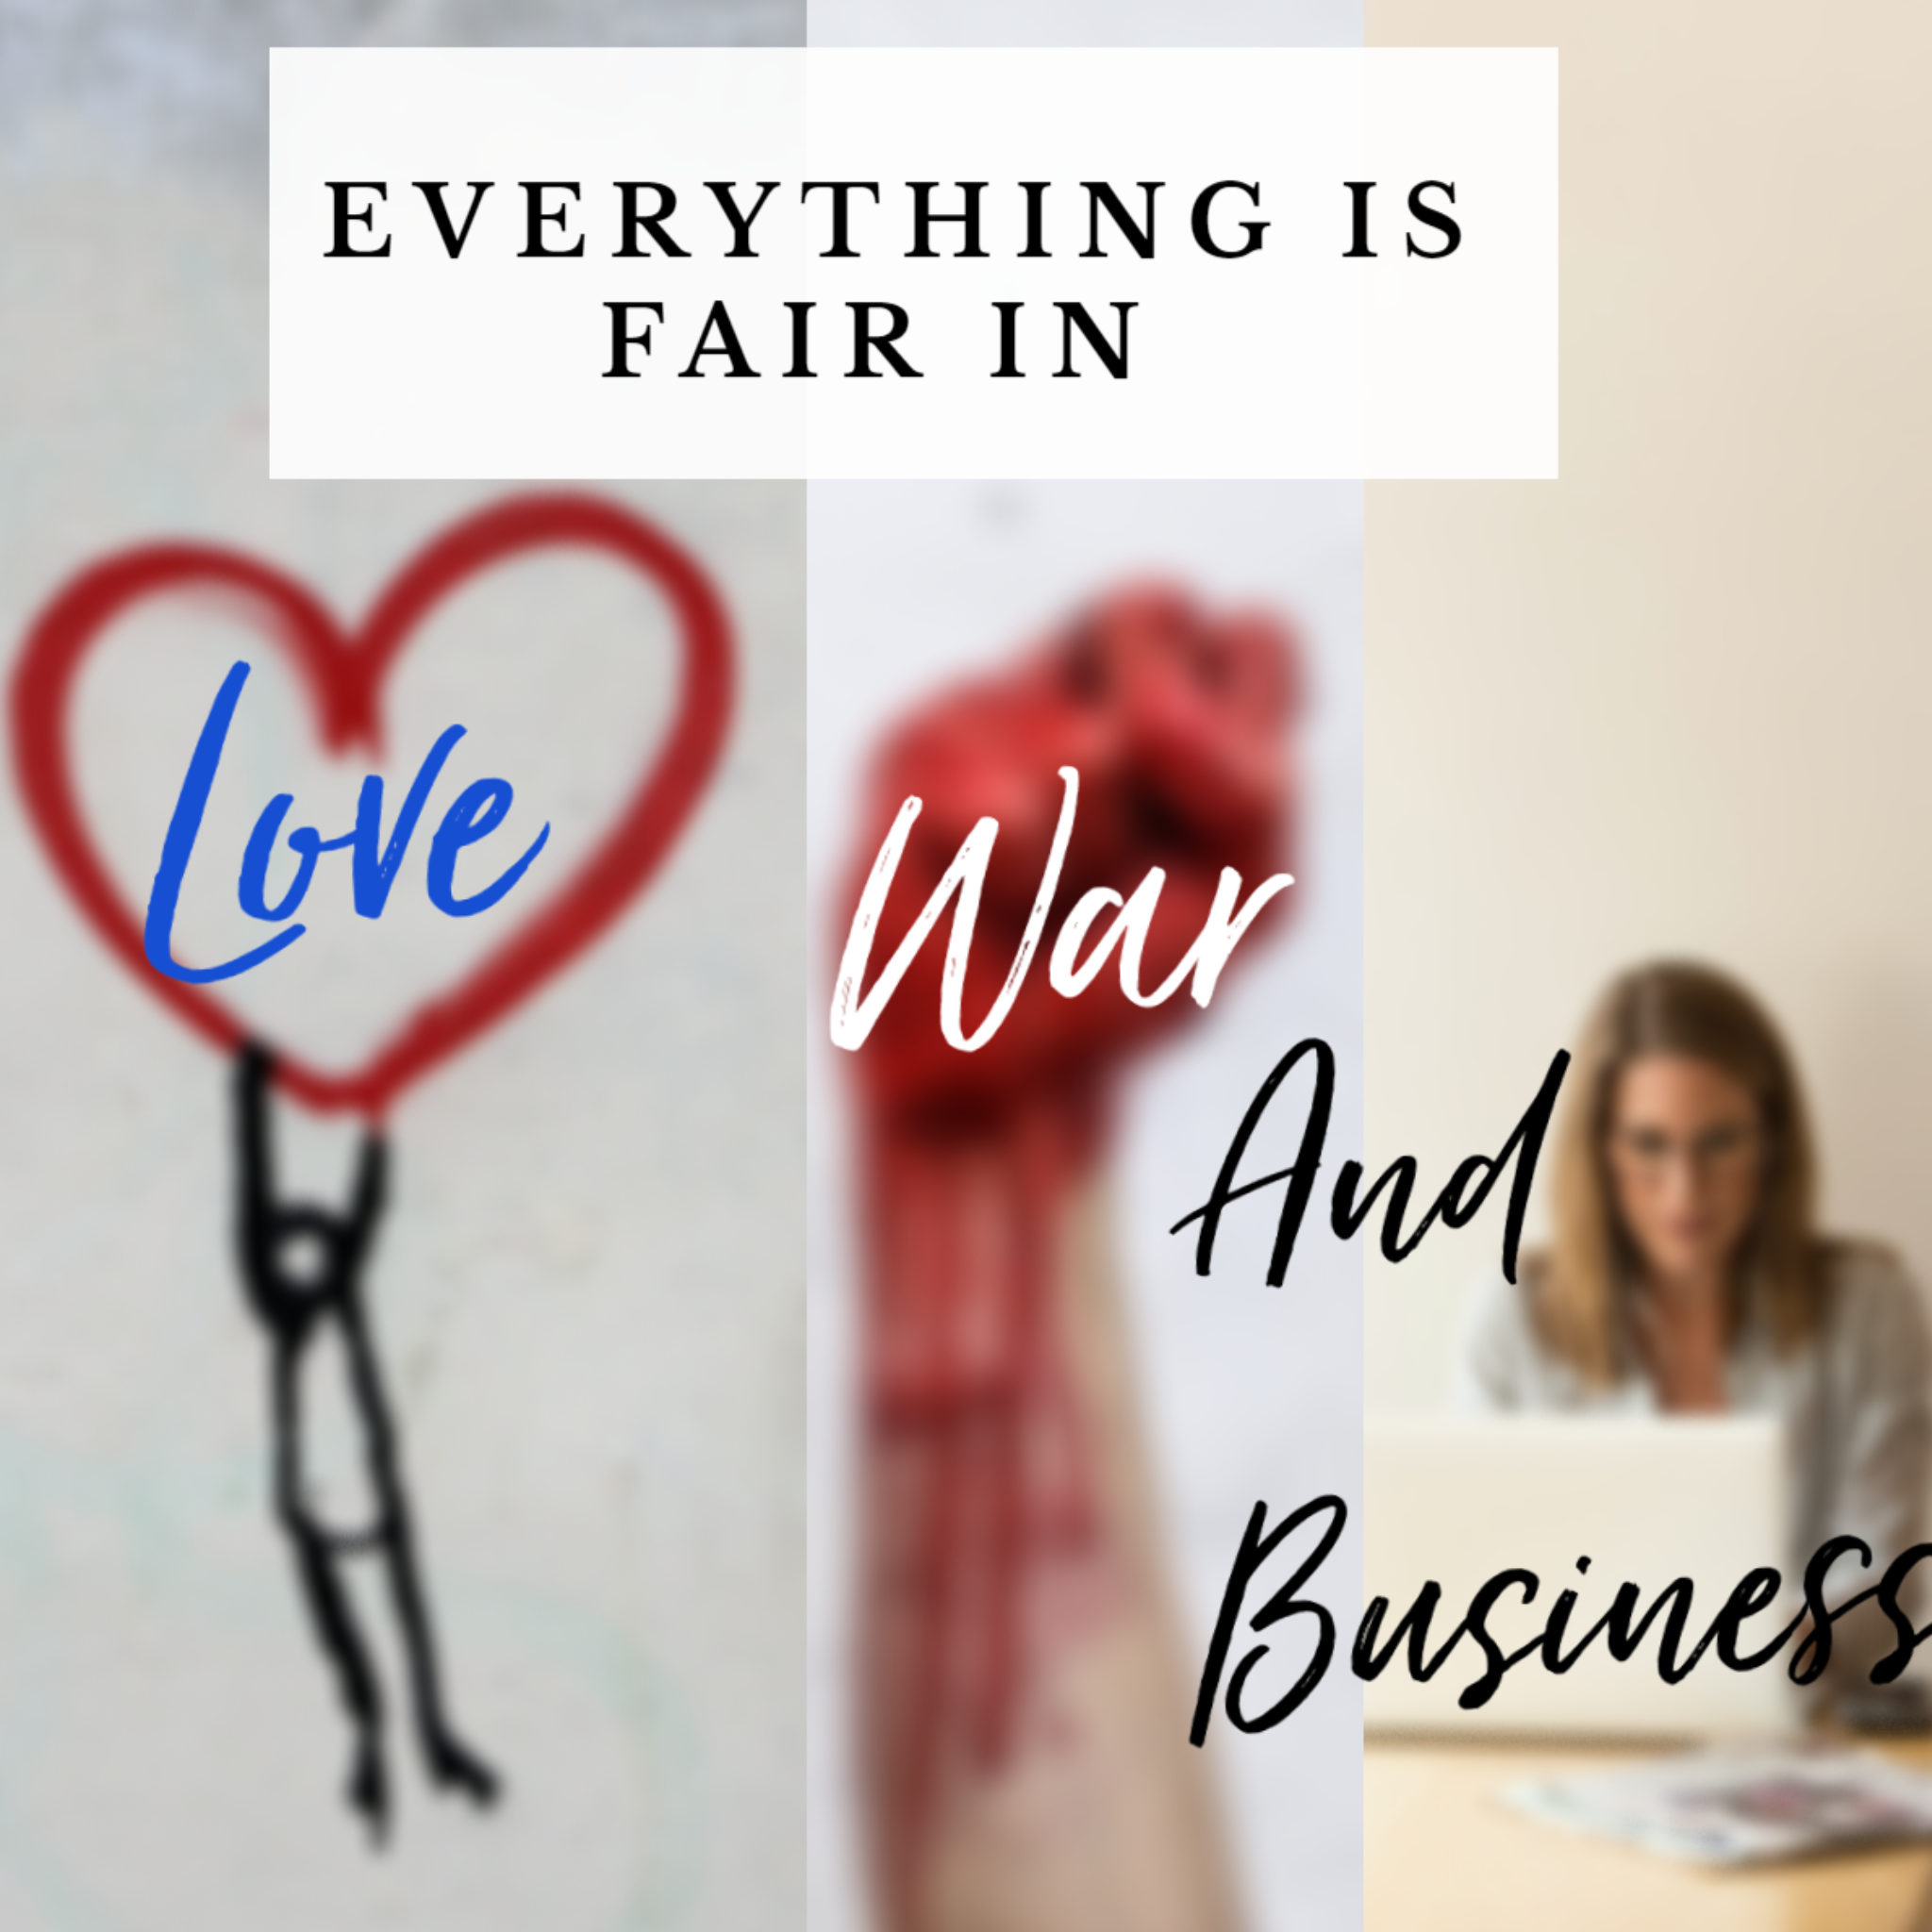 Everything is fair in love war and business